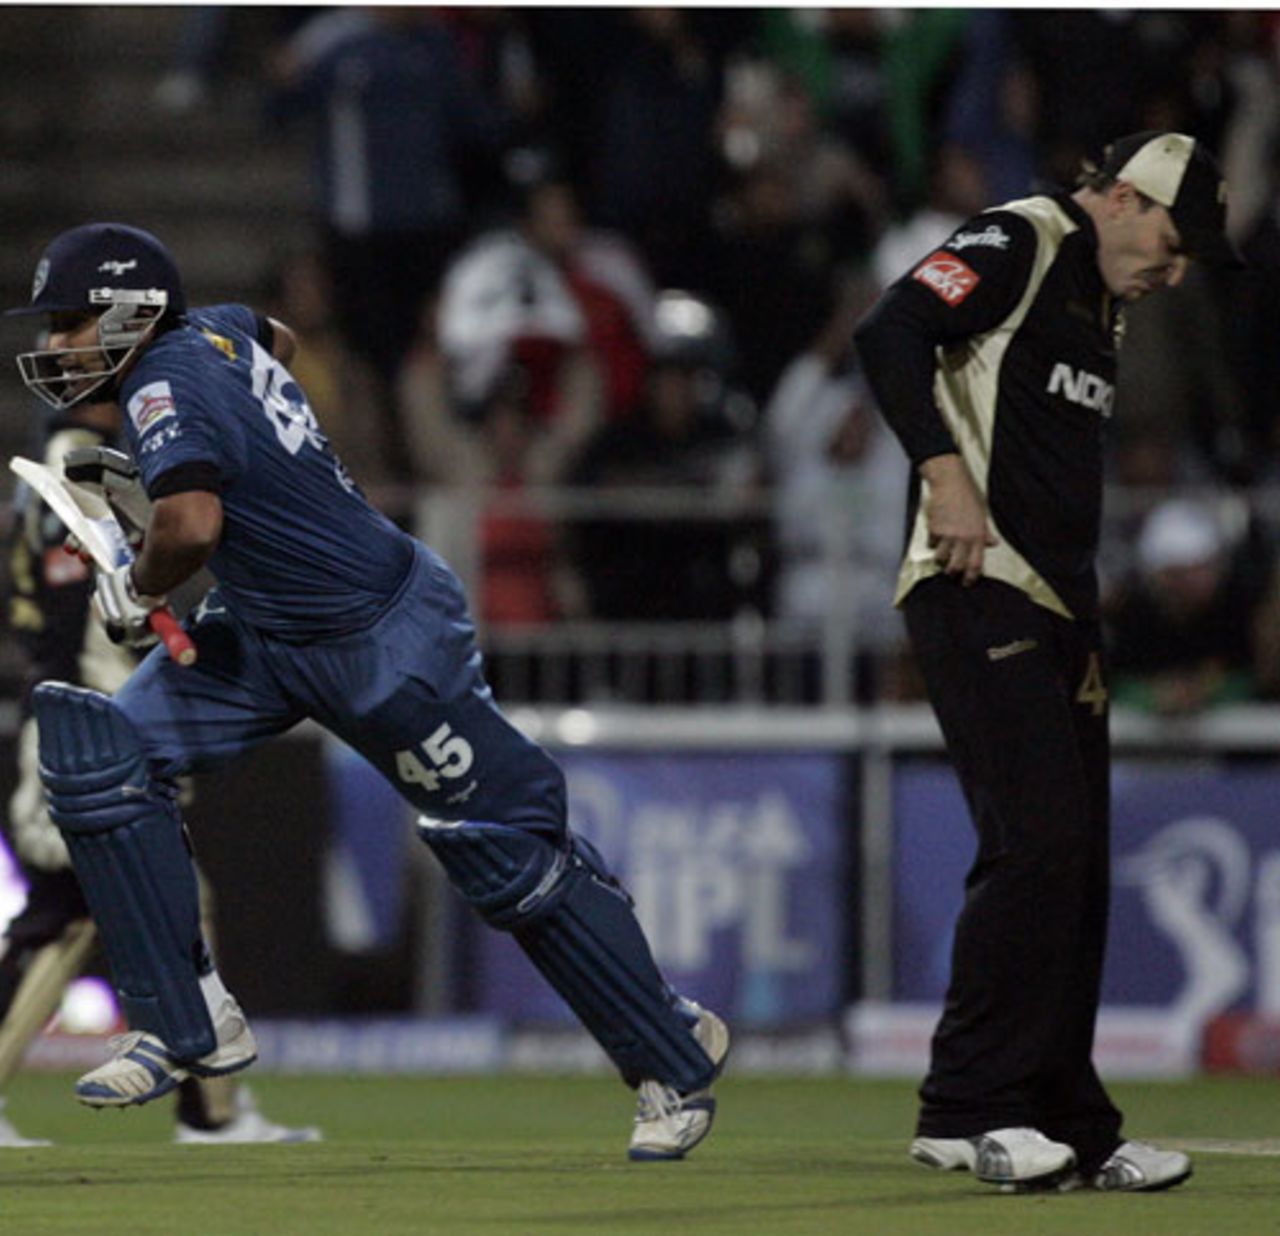 Brendon McCullum is a picture of disappointment after Rohit Sharma steals the win, Deccan Chargers v Kolkata Knight Riders, IPL, Johannesburg, May 16, 2009 